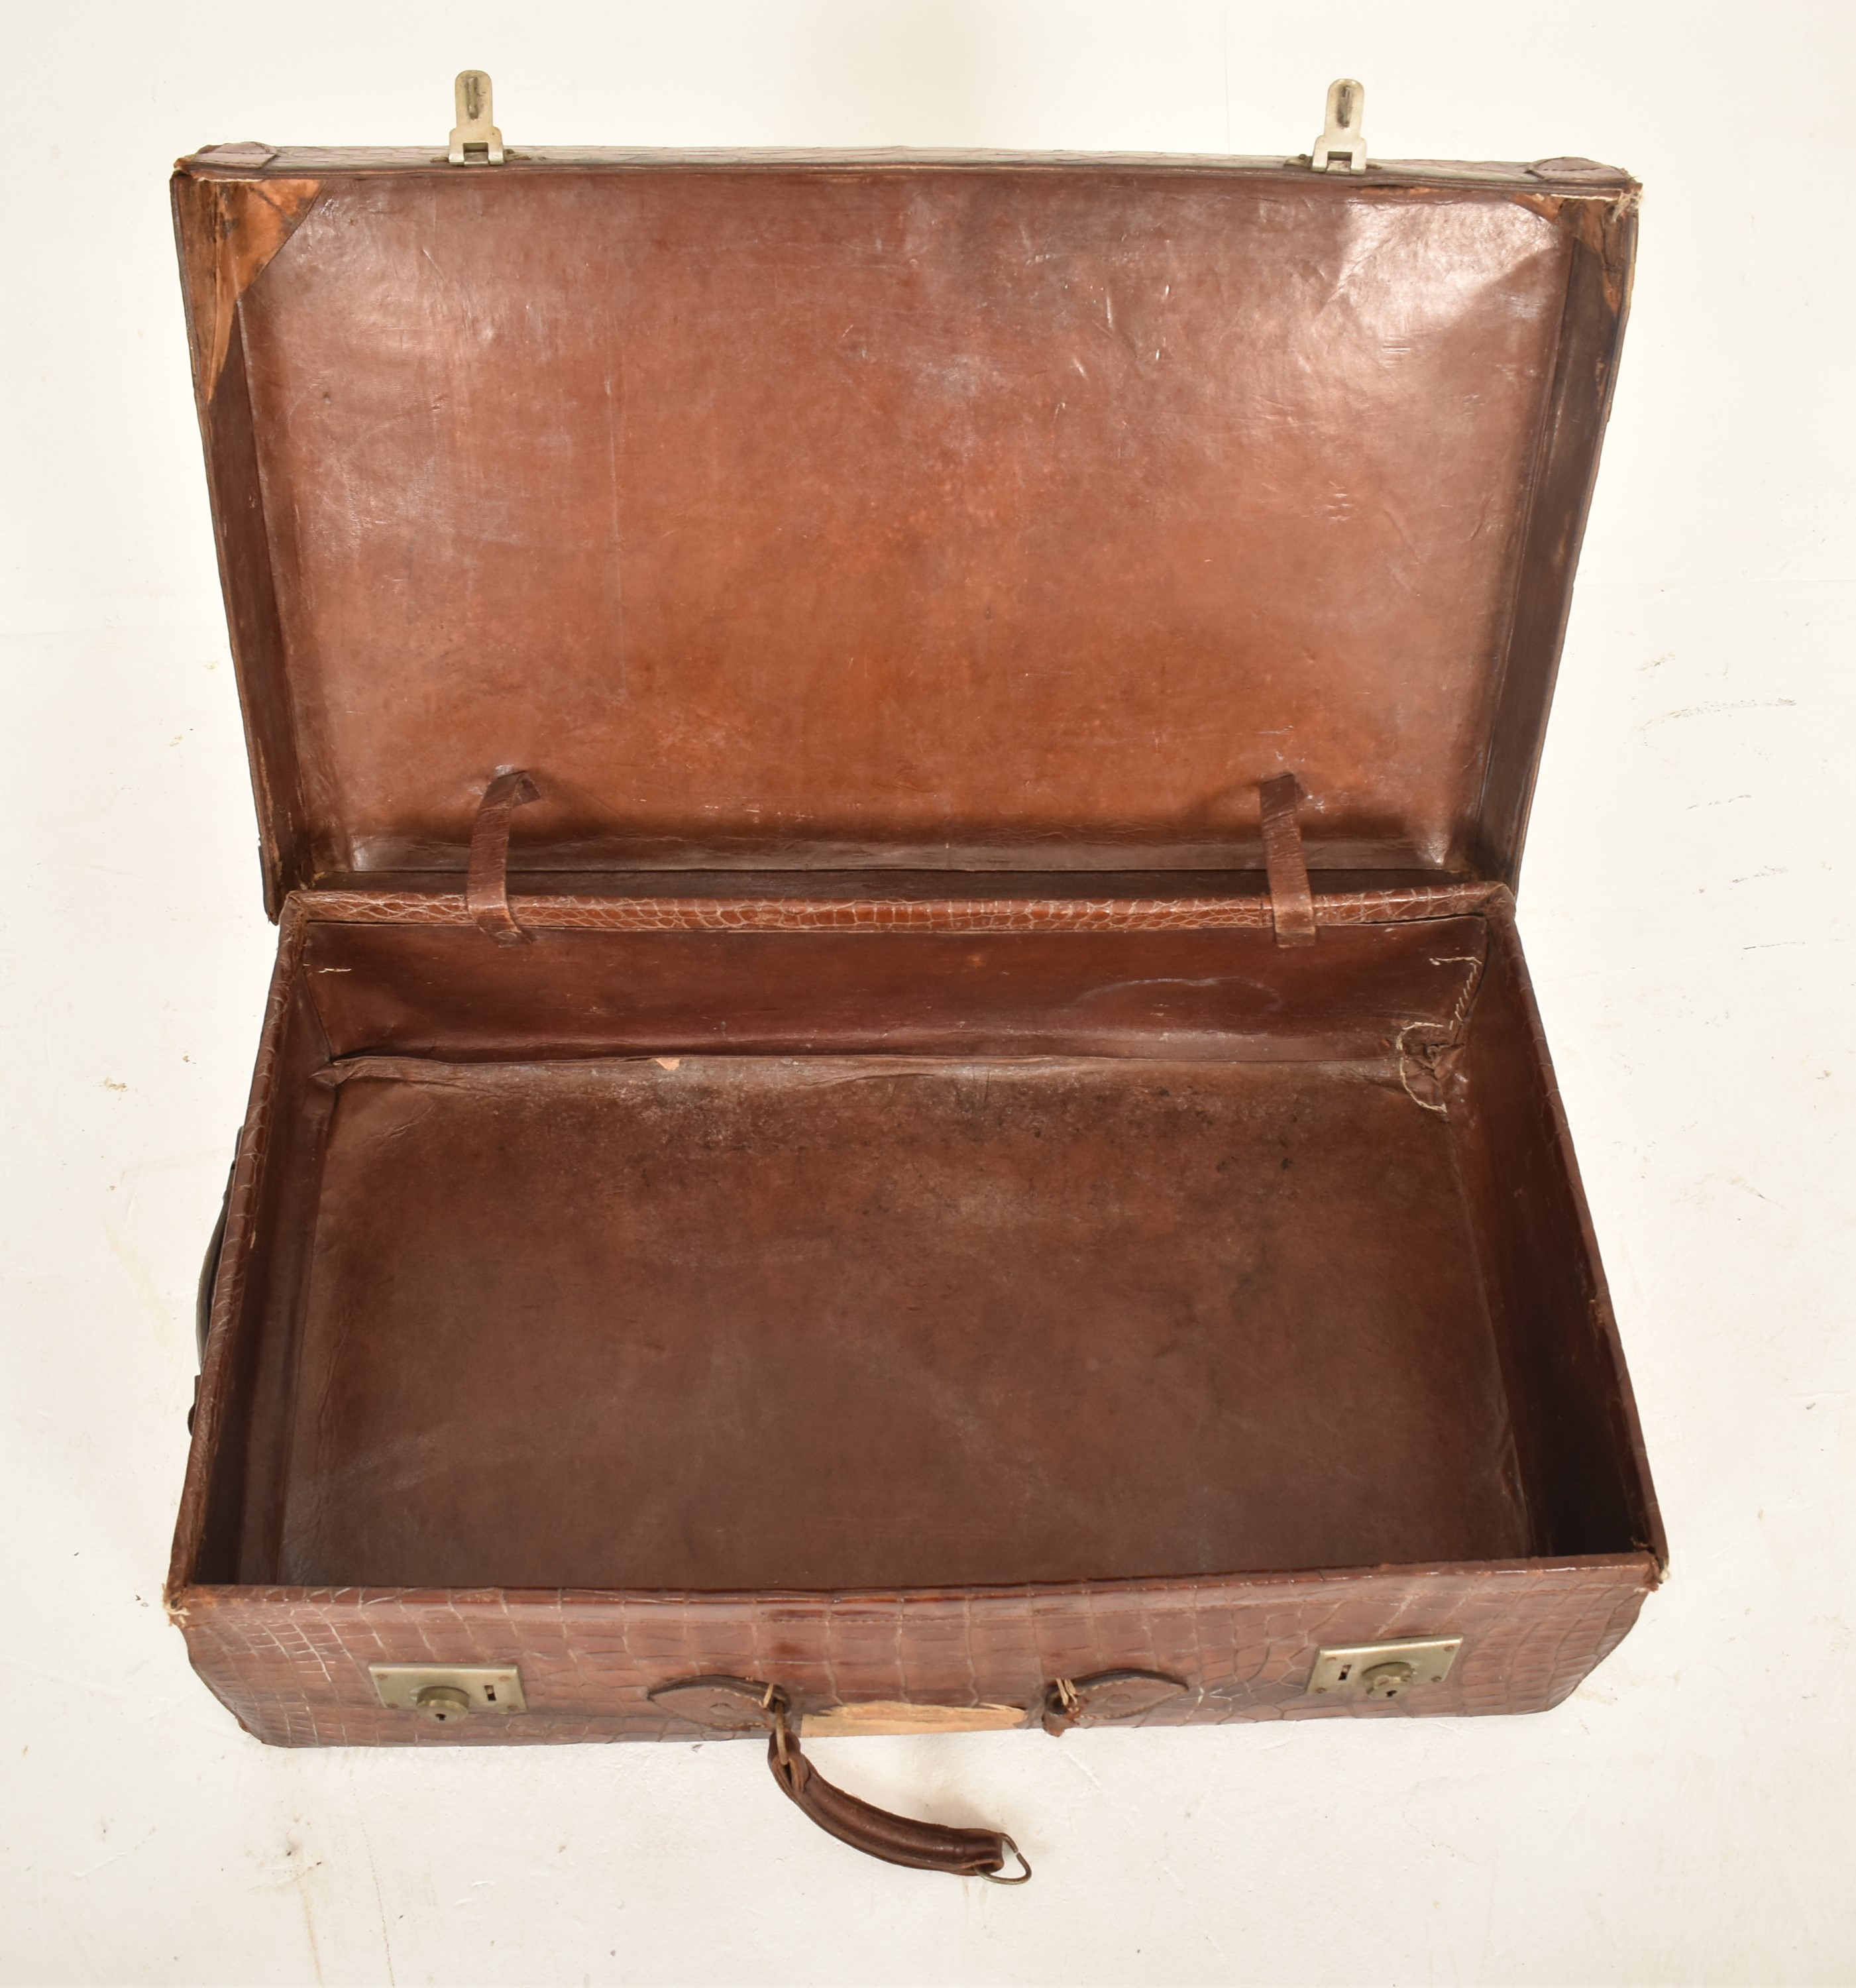 EARLY 20TH CENTURY CROCODILE SKIN LEATHER SUITCASE - Image 2 of 5